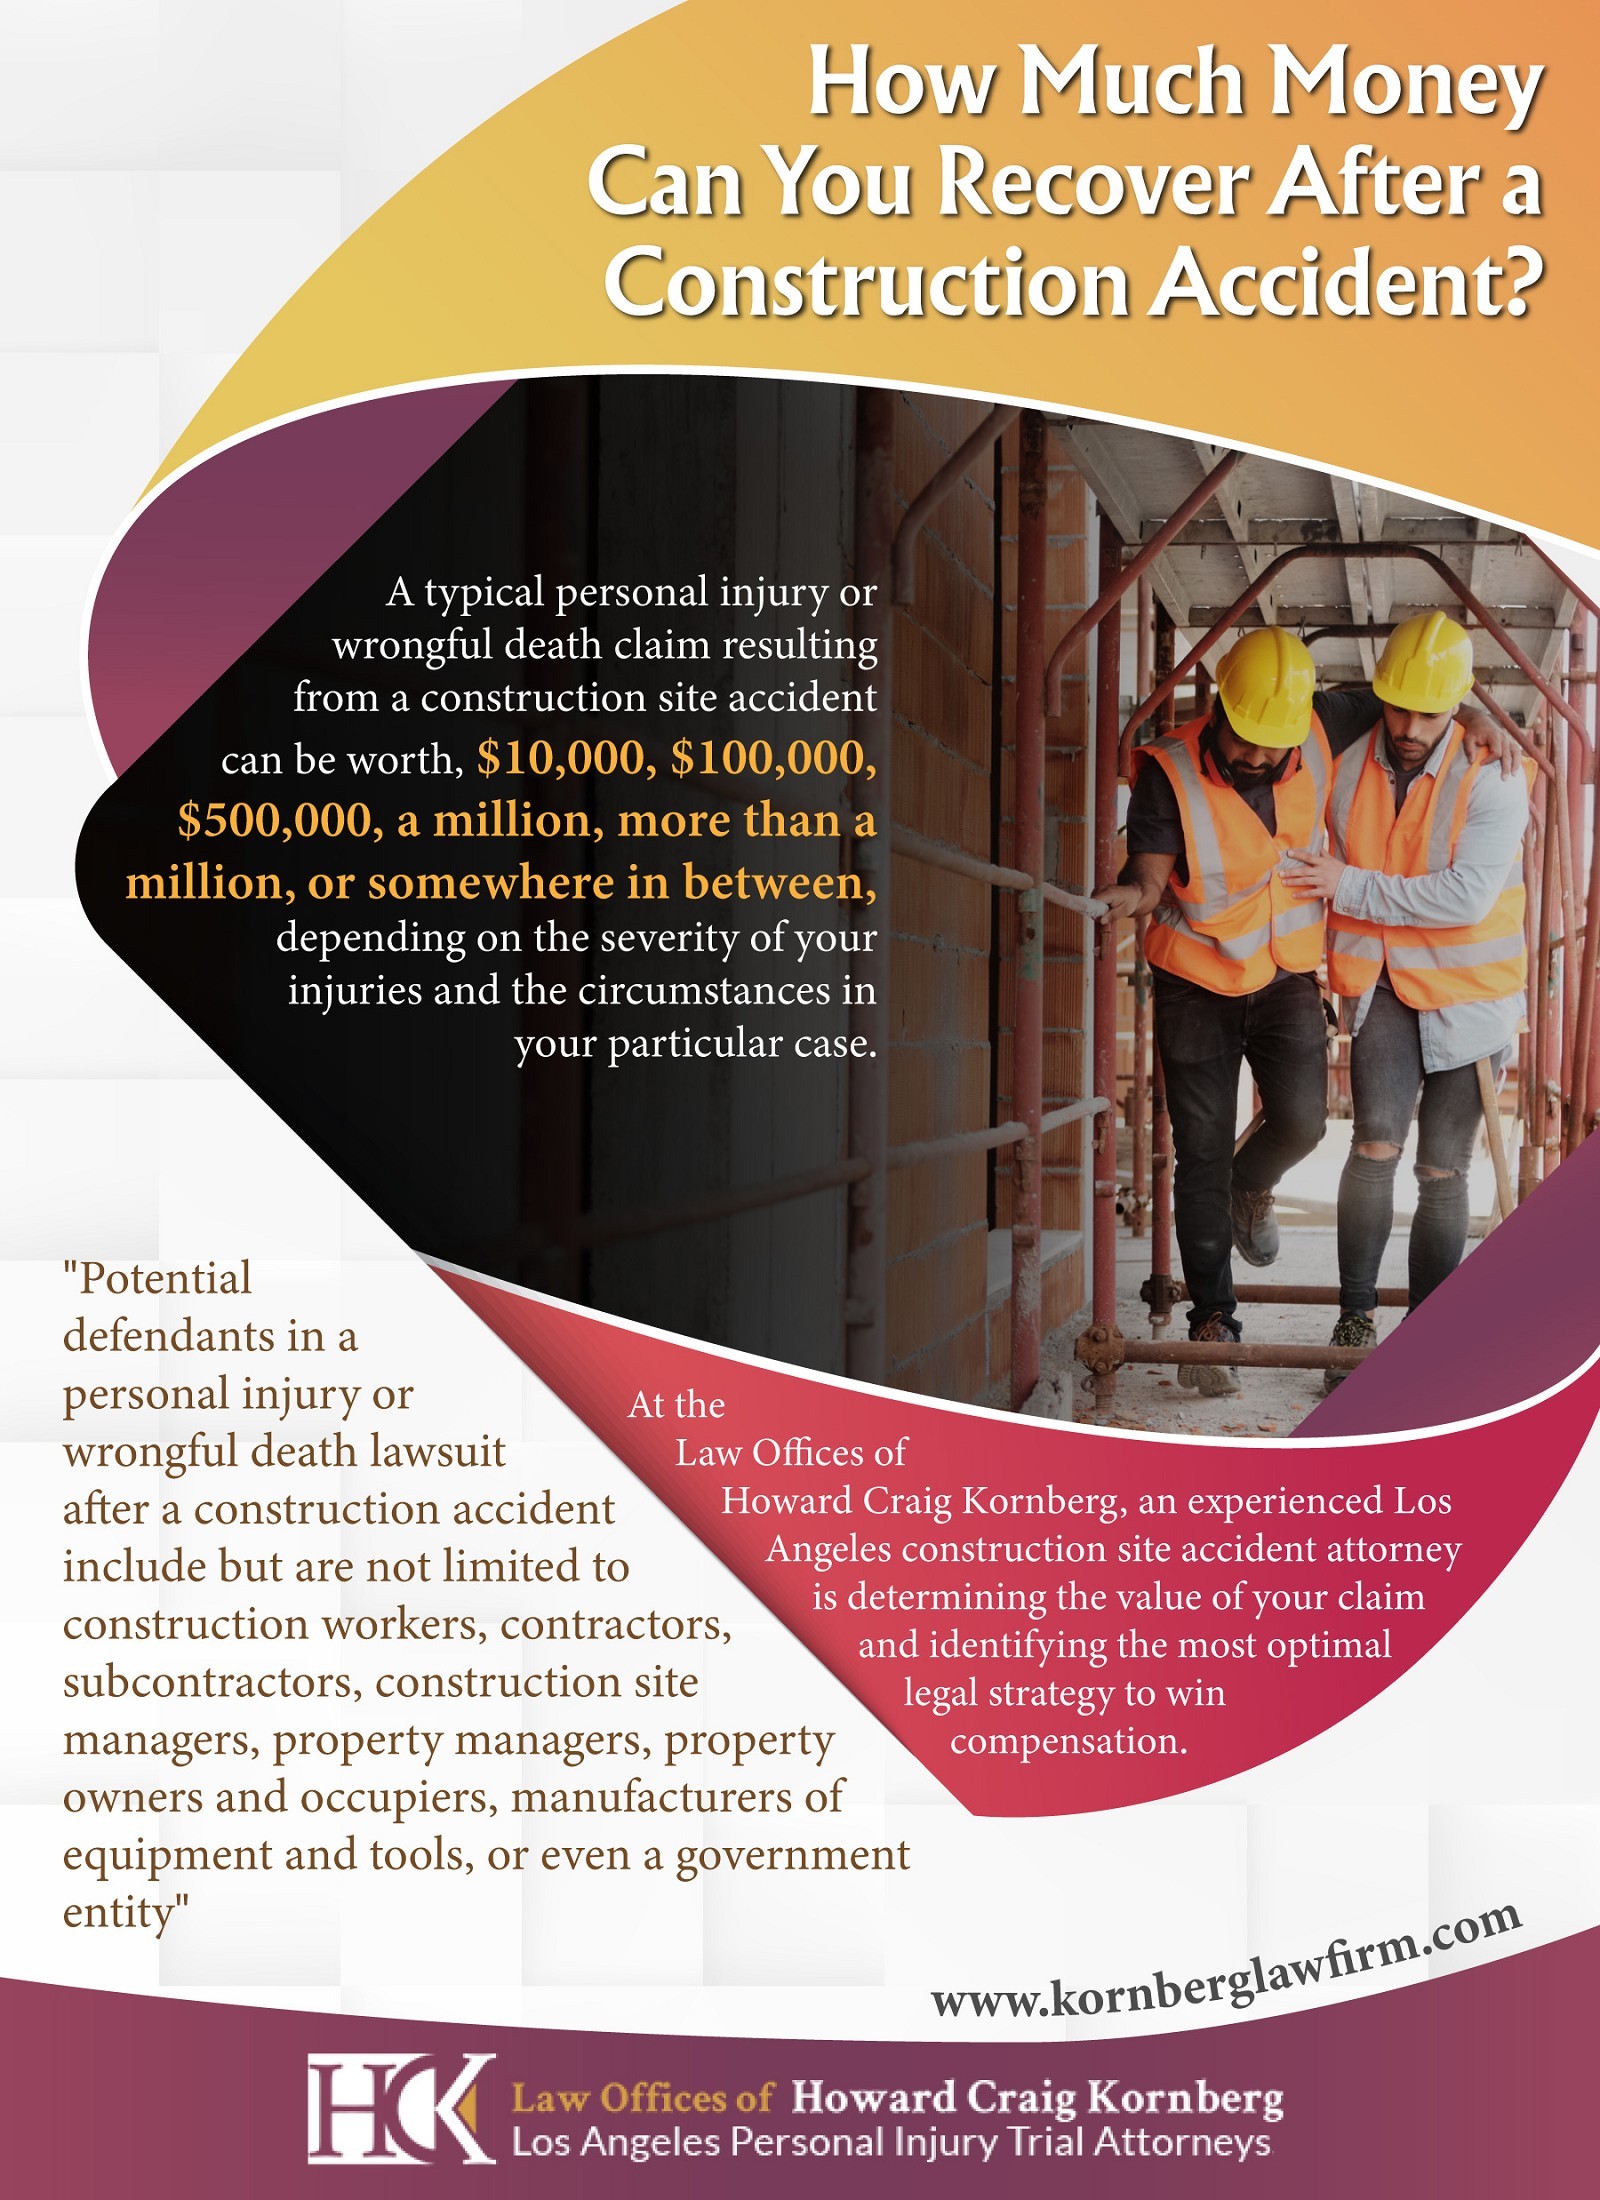 How Much Money Can You Recover After a Construction Accident?